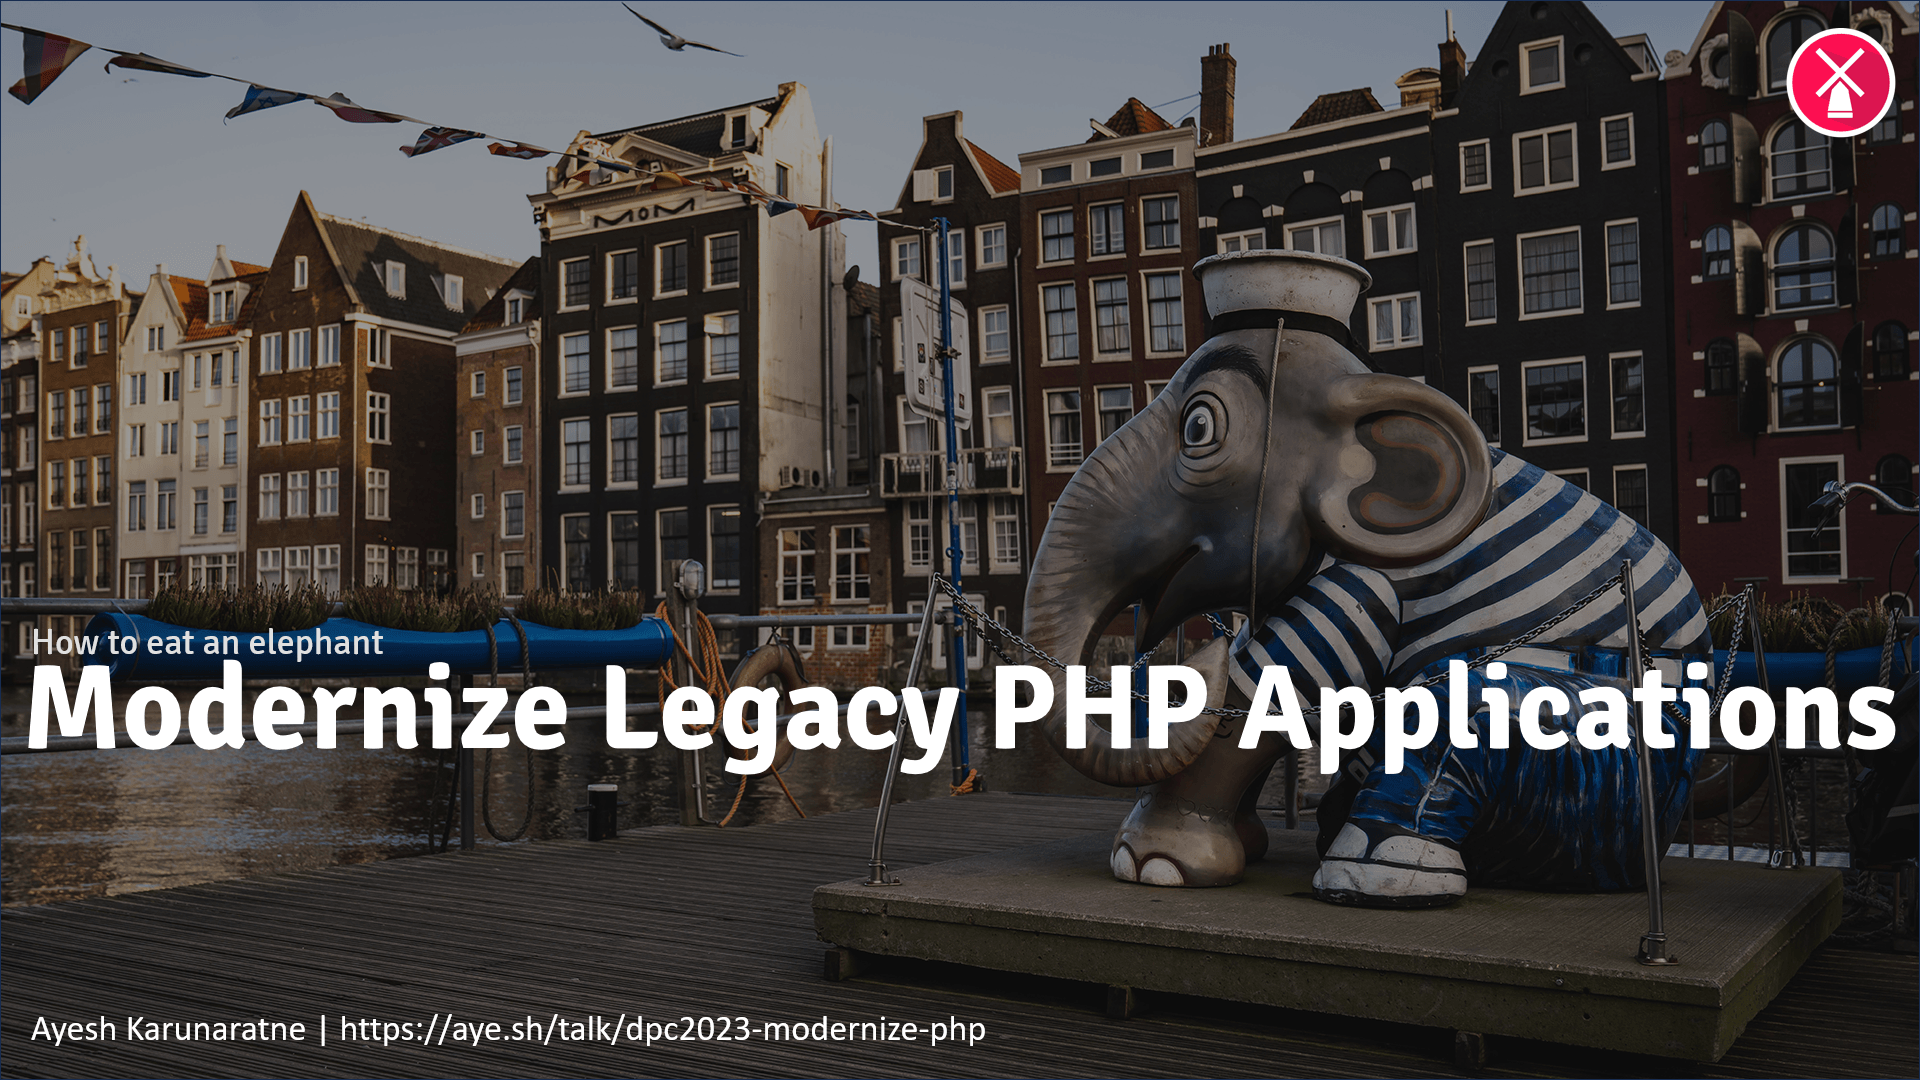 How to eat an ElePHPant: How to modernize your legacy PHP Applications